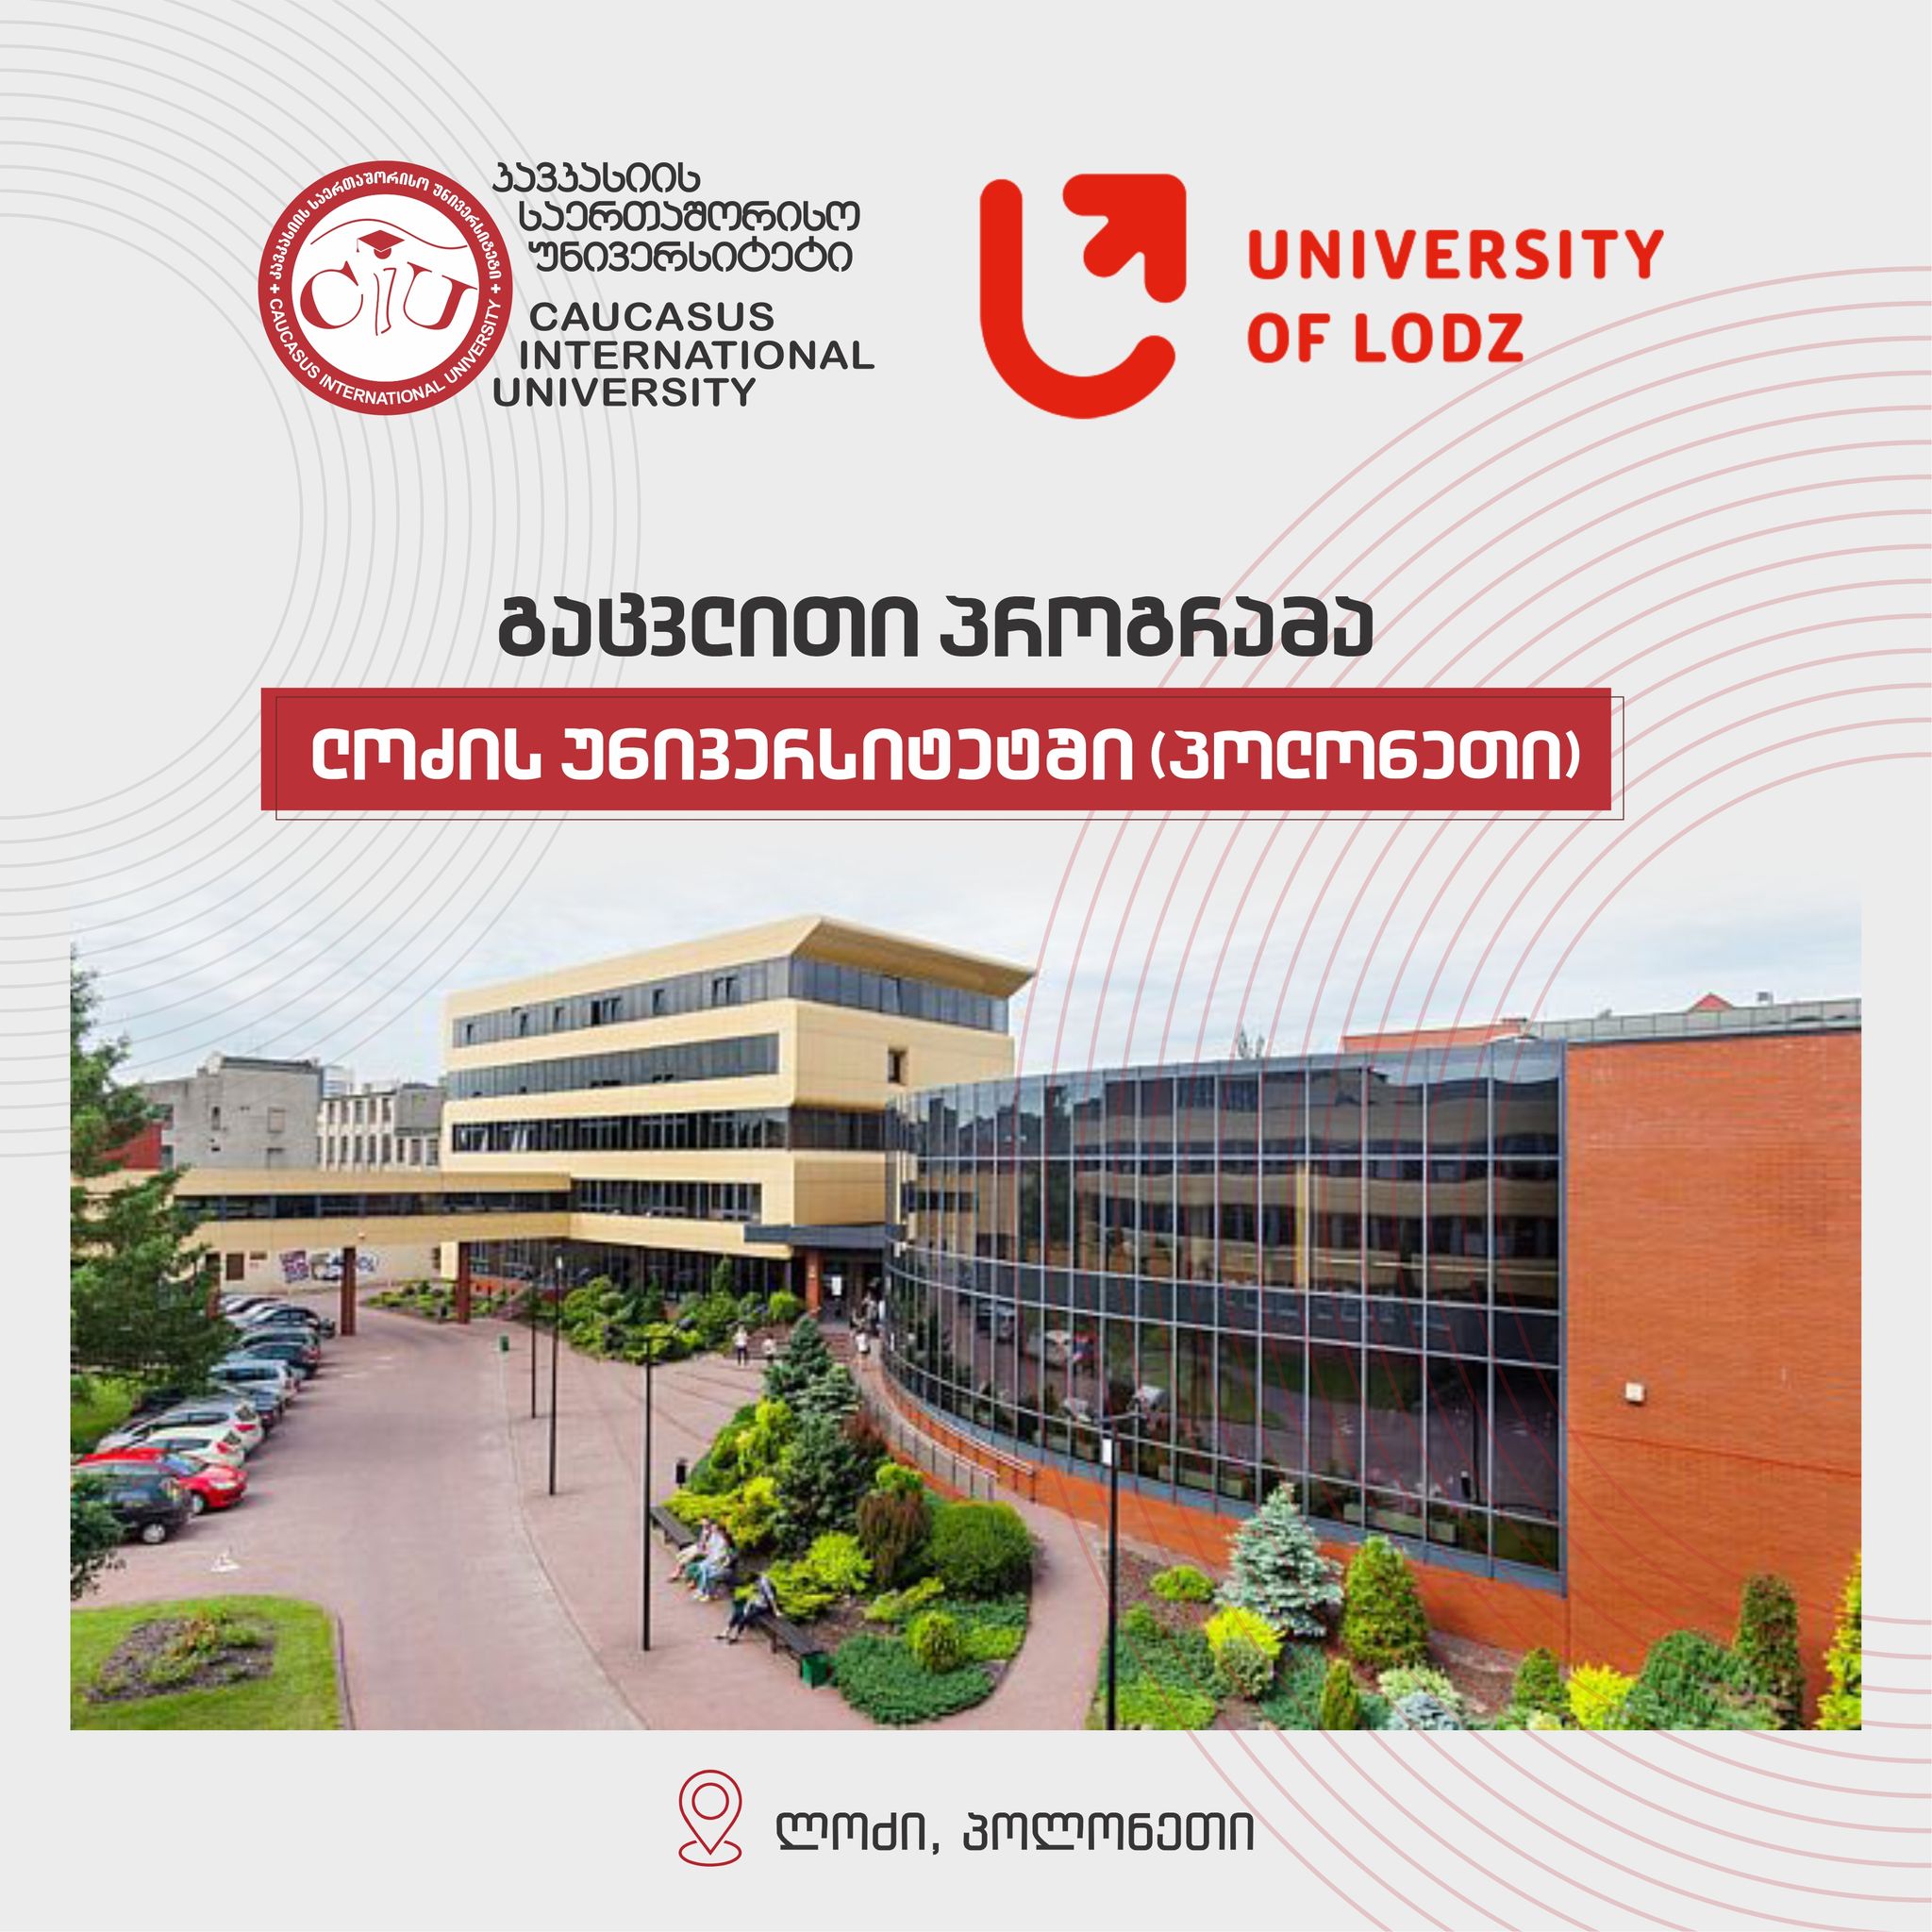 Exchange Program at the University of Lodz (Poland) for CIU Students